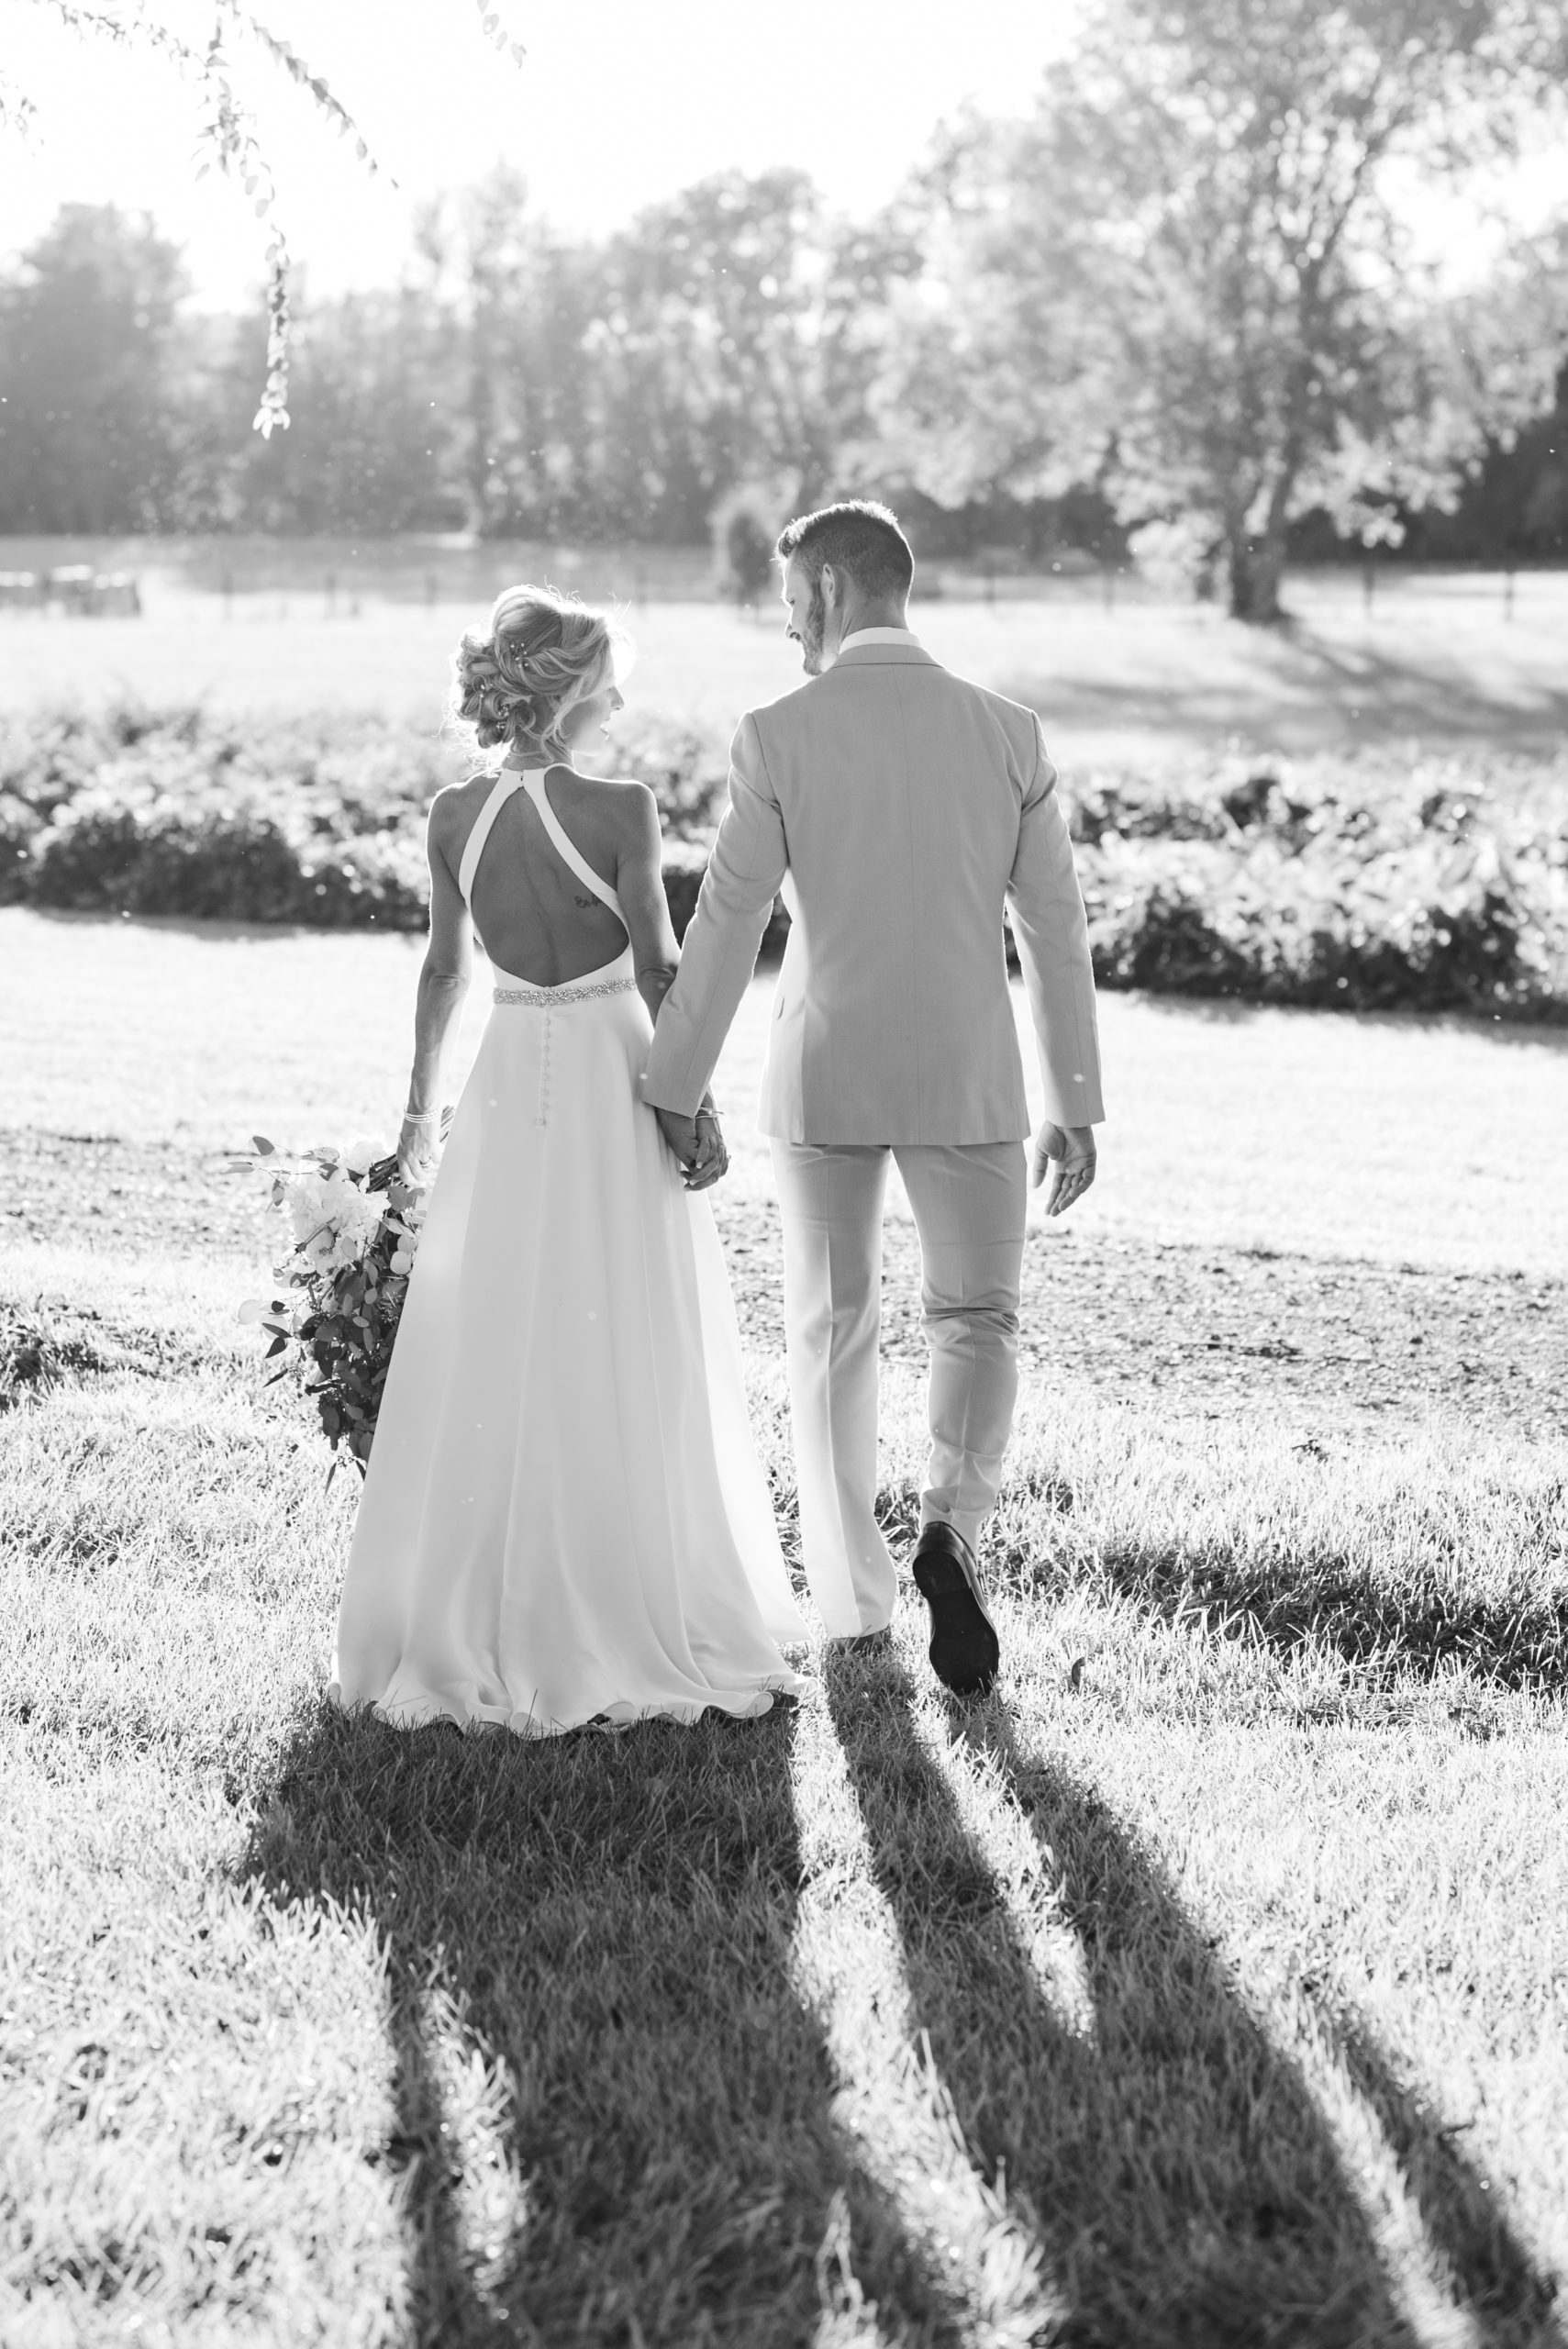 Fall Wedding at Holy Spirit Catholic Church and Mariah's in Bowling Green, Kentucky by Sweet Williams Photography, a wedding and portrait photographer.